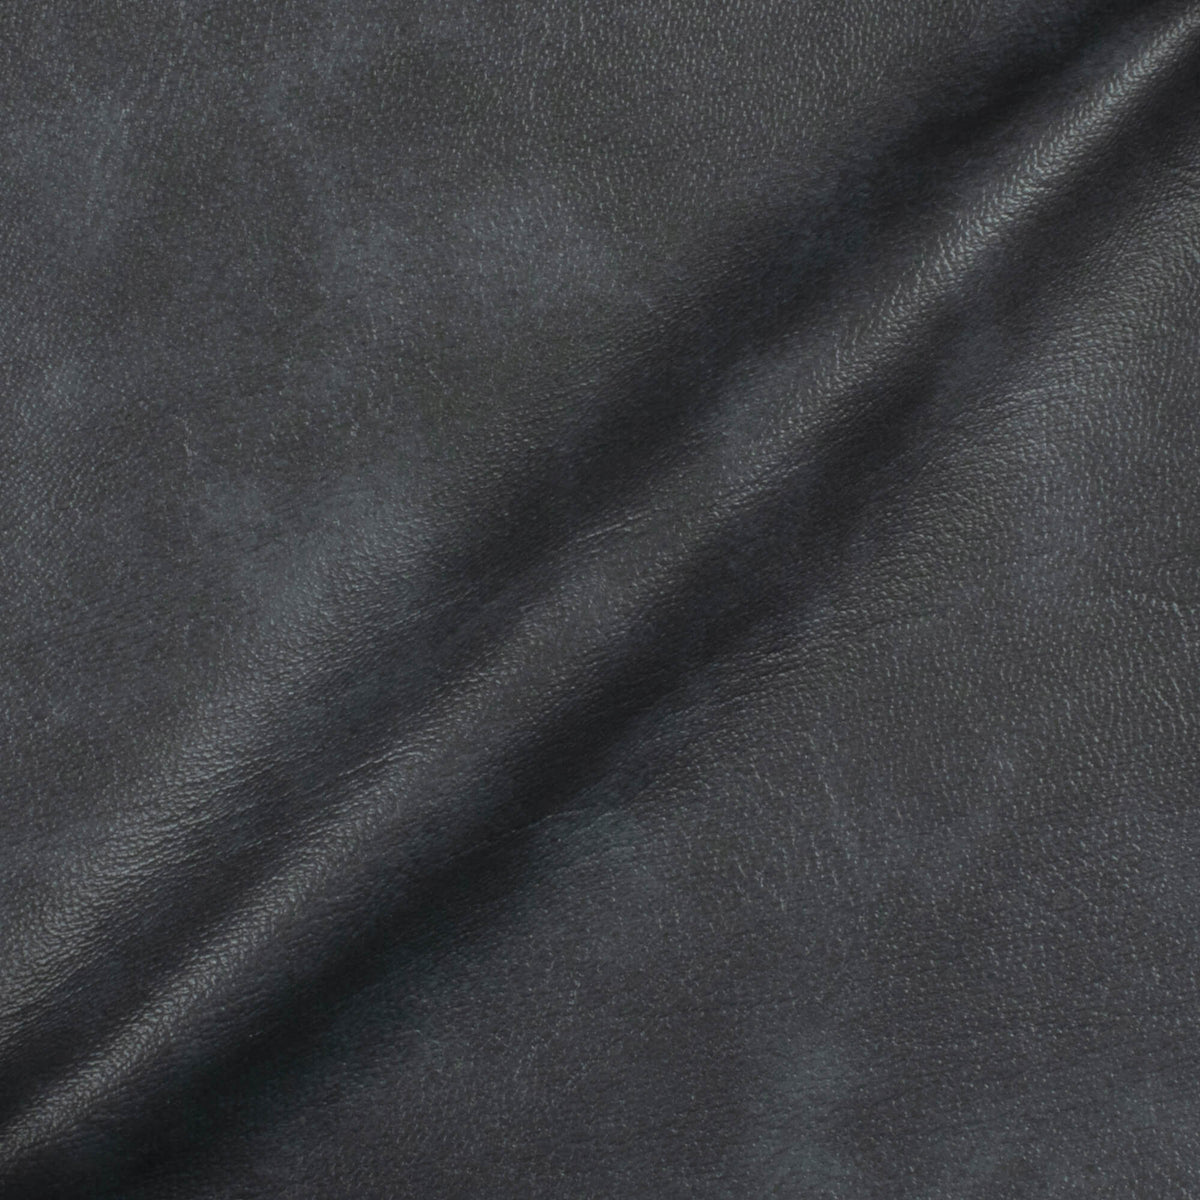 Charcoal Grey Self Textured Exclusive Sofa Fabric (Width 54 Inches)